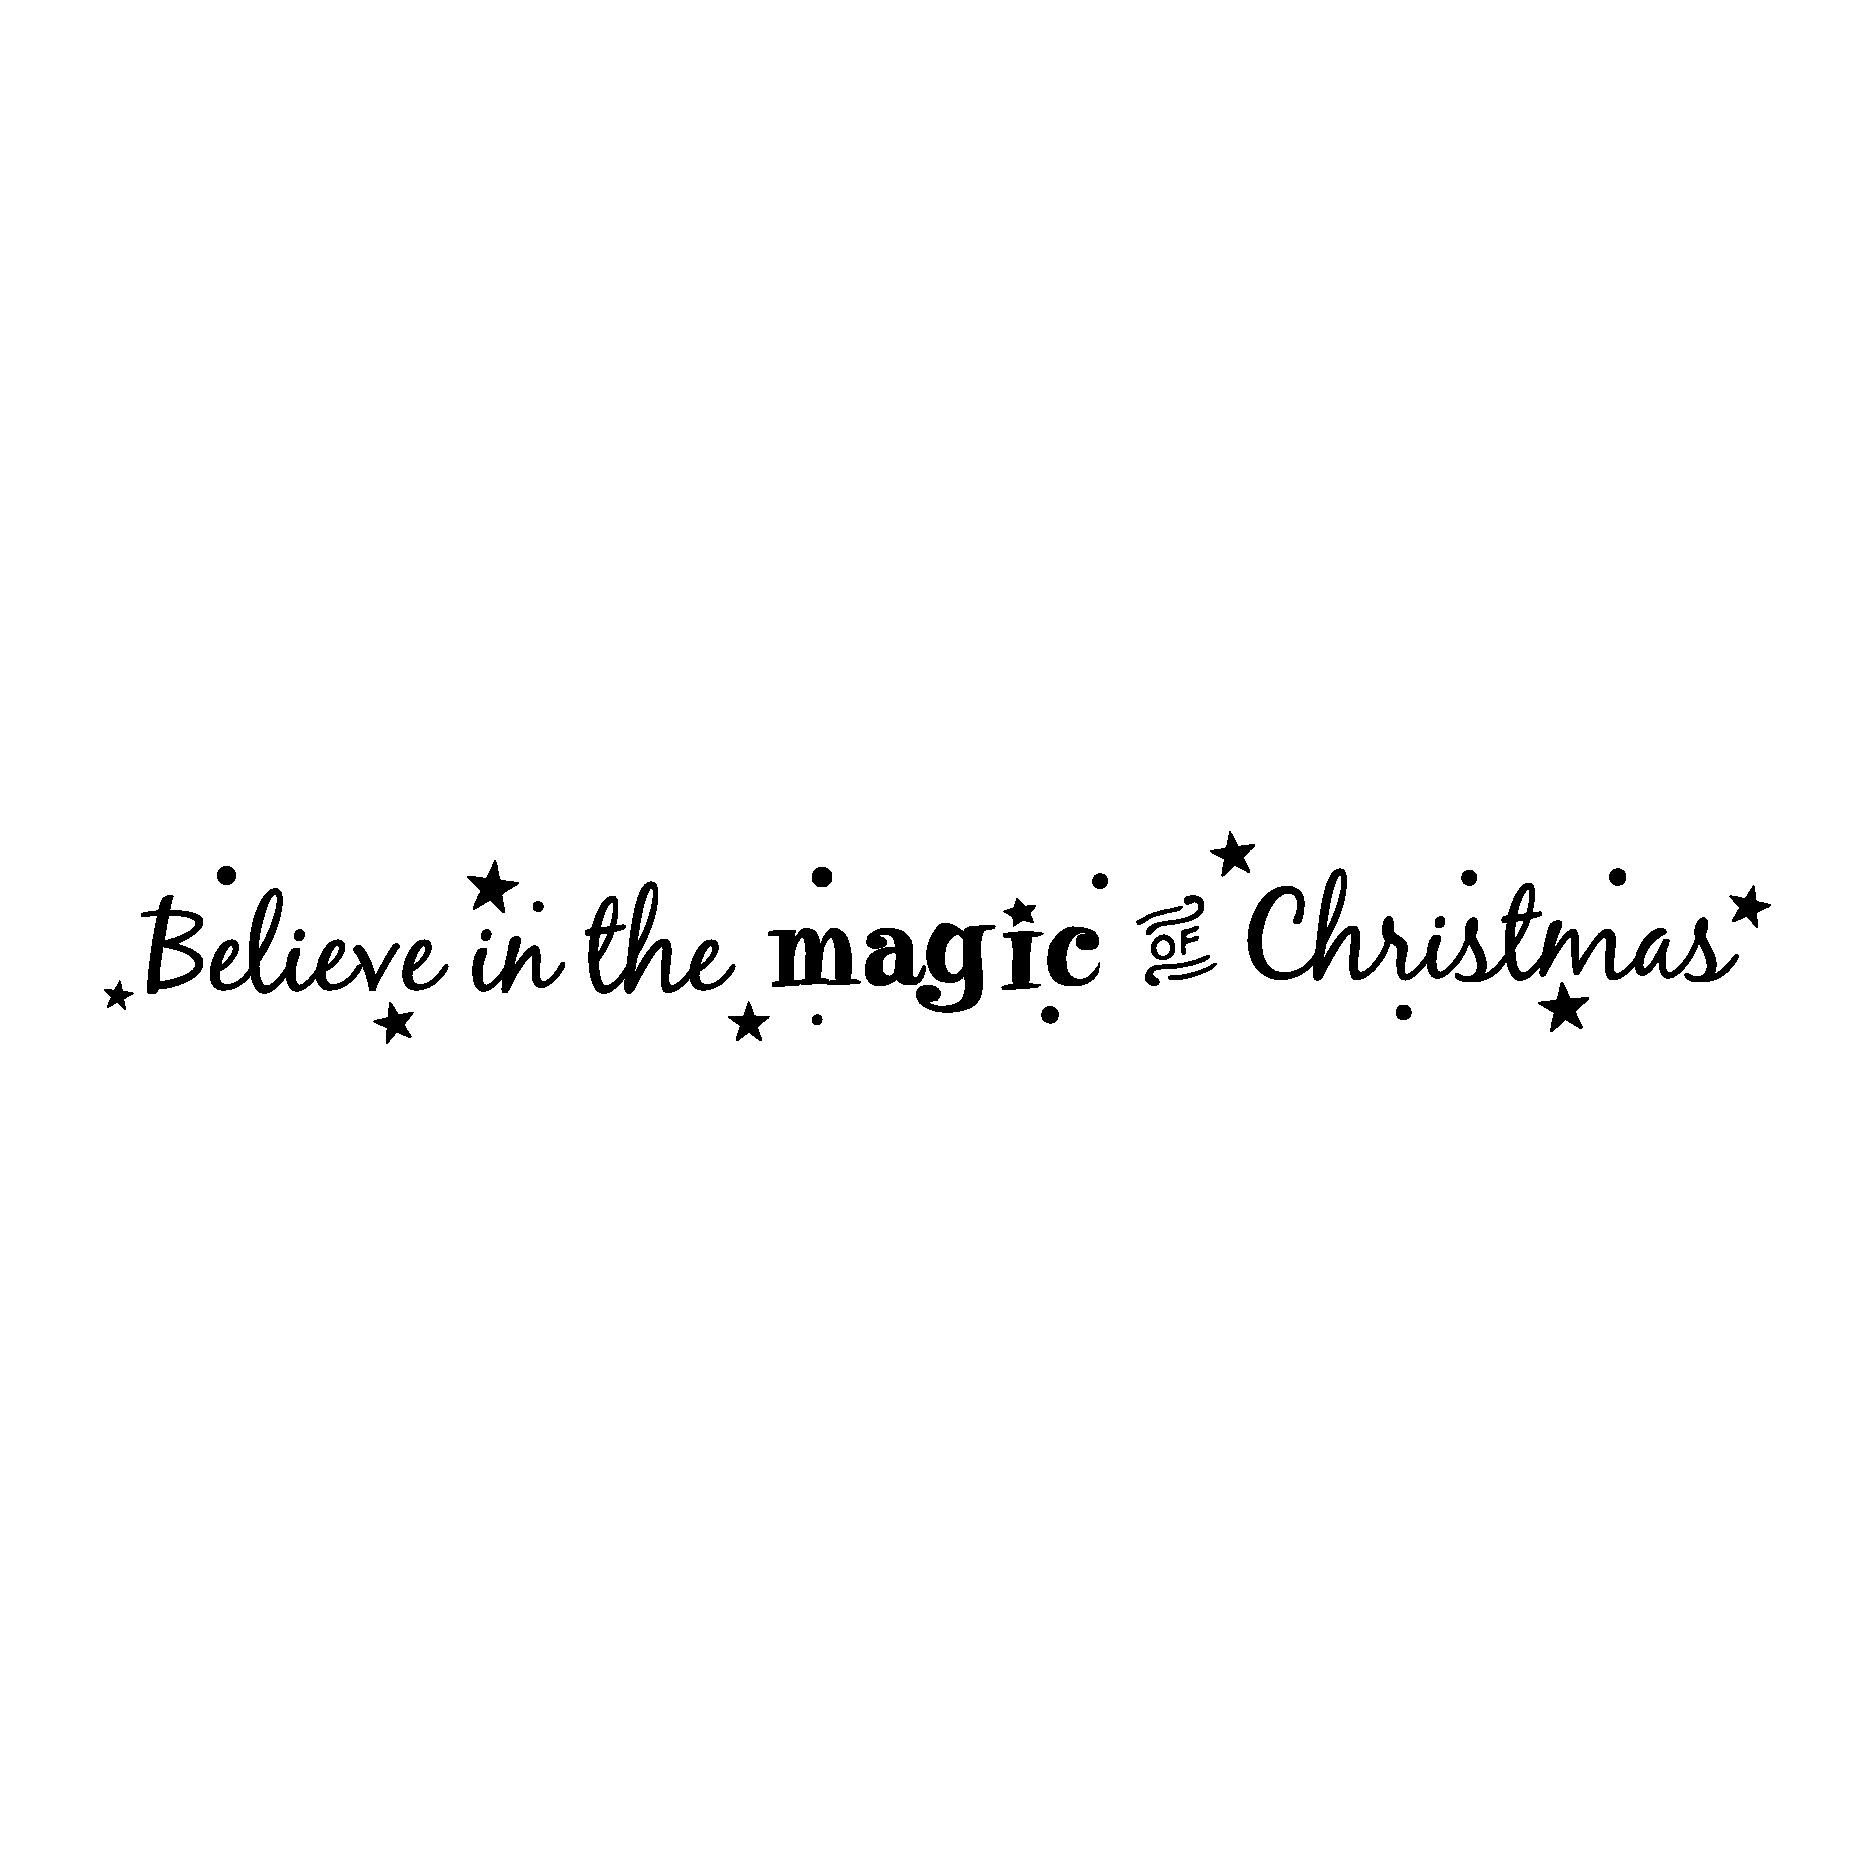 The Magic Of Christmas Quotes
 Magic Christmas Wall Quotes™ Decal